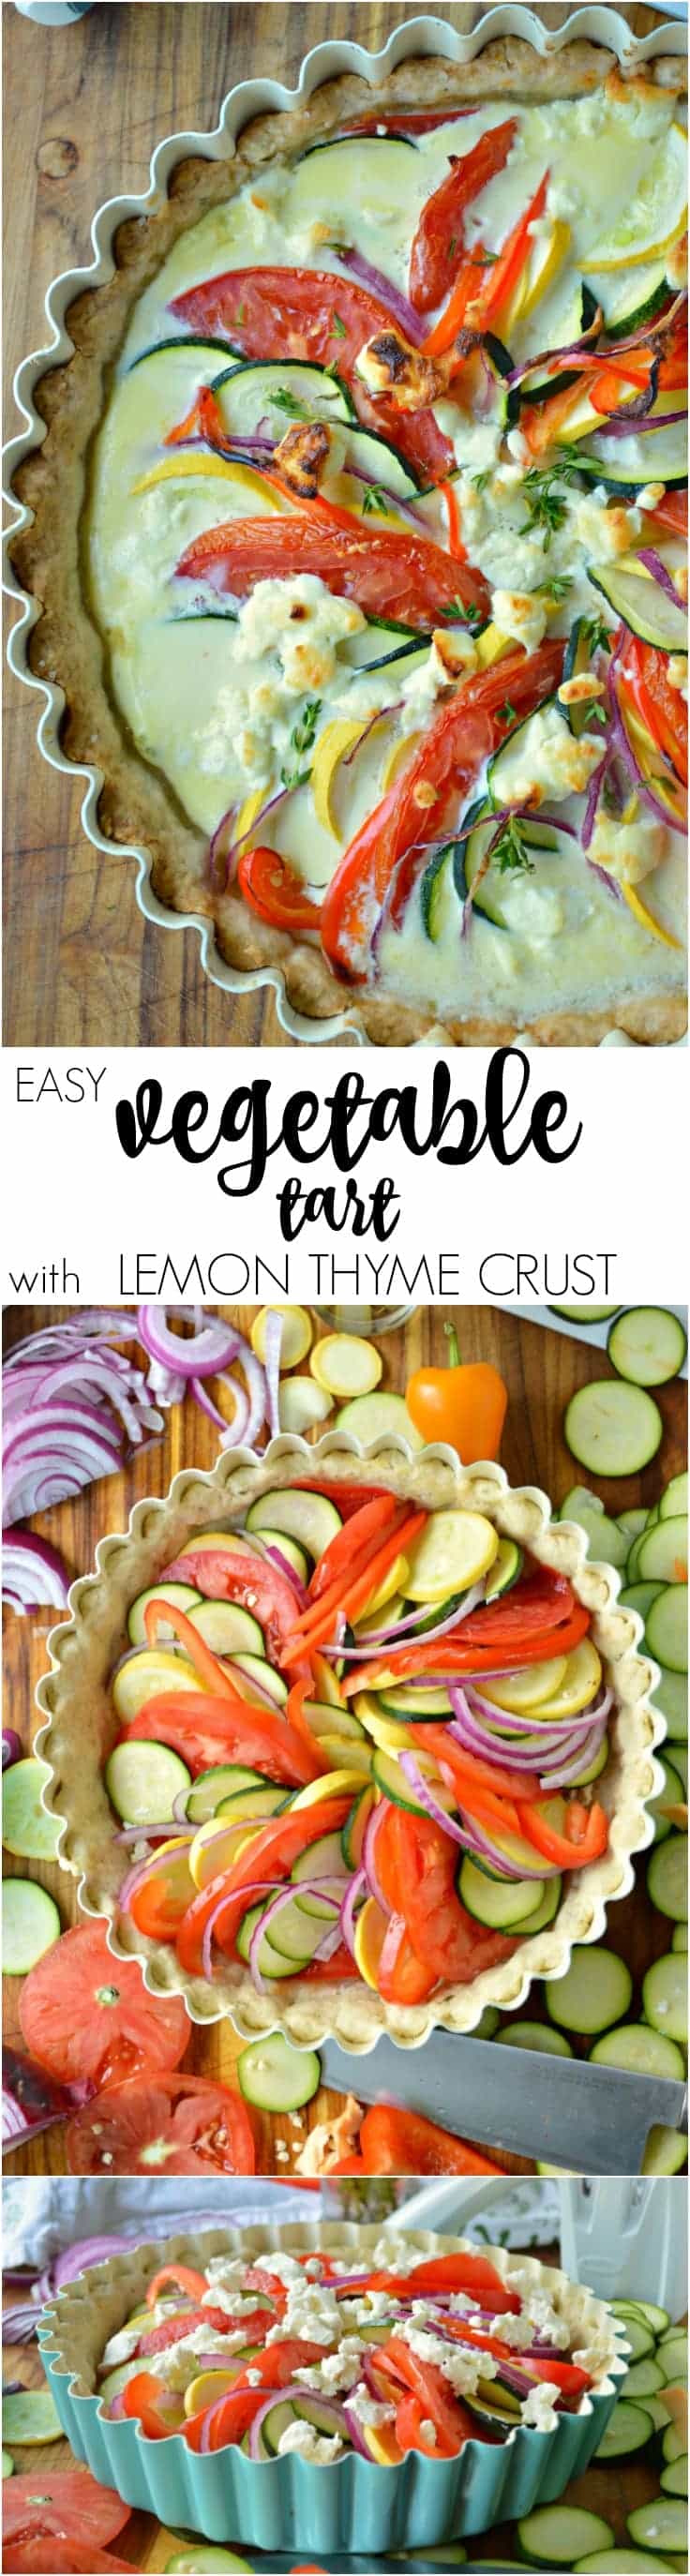 This Easy Vegetable Tart has a buttery lemon thyme crust and comes together SO simply with just a little bit of knife work. Perfect for breakfast, brunch, or a side dish!